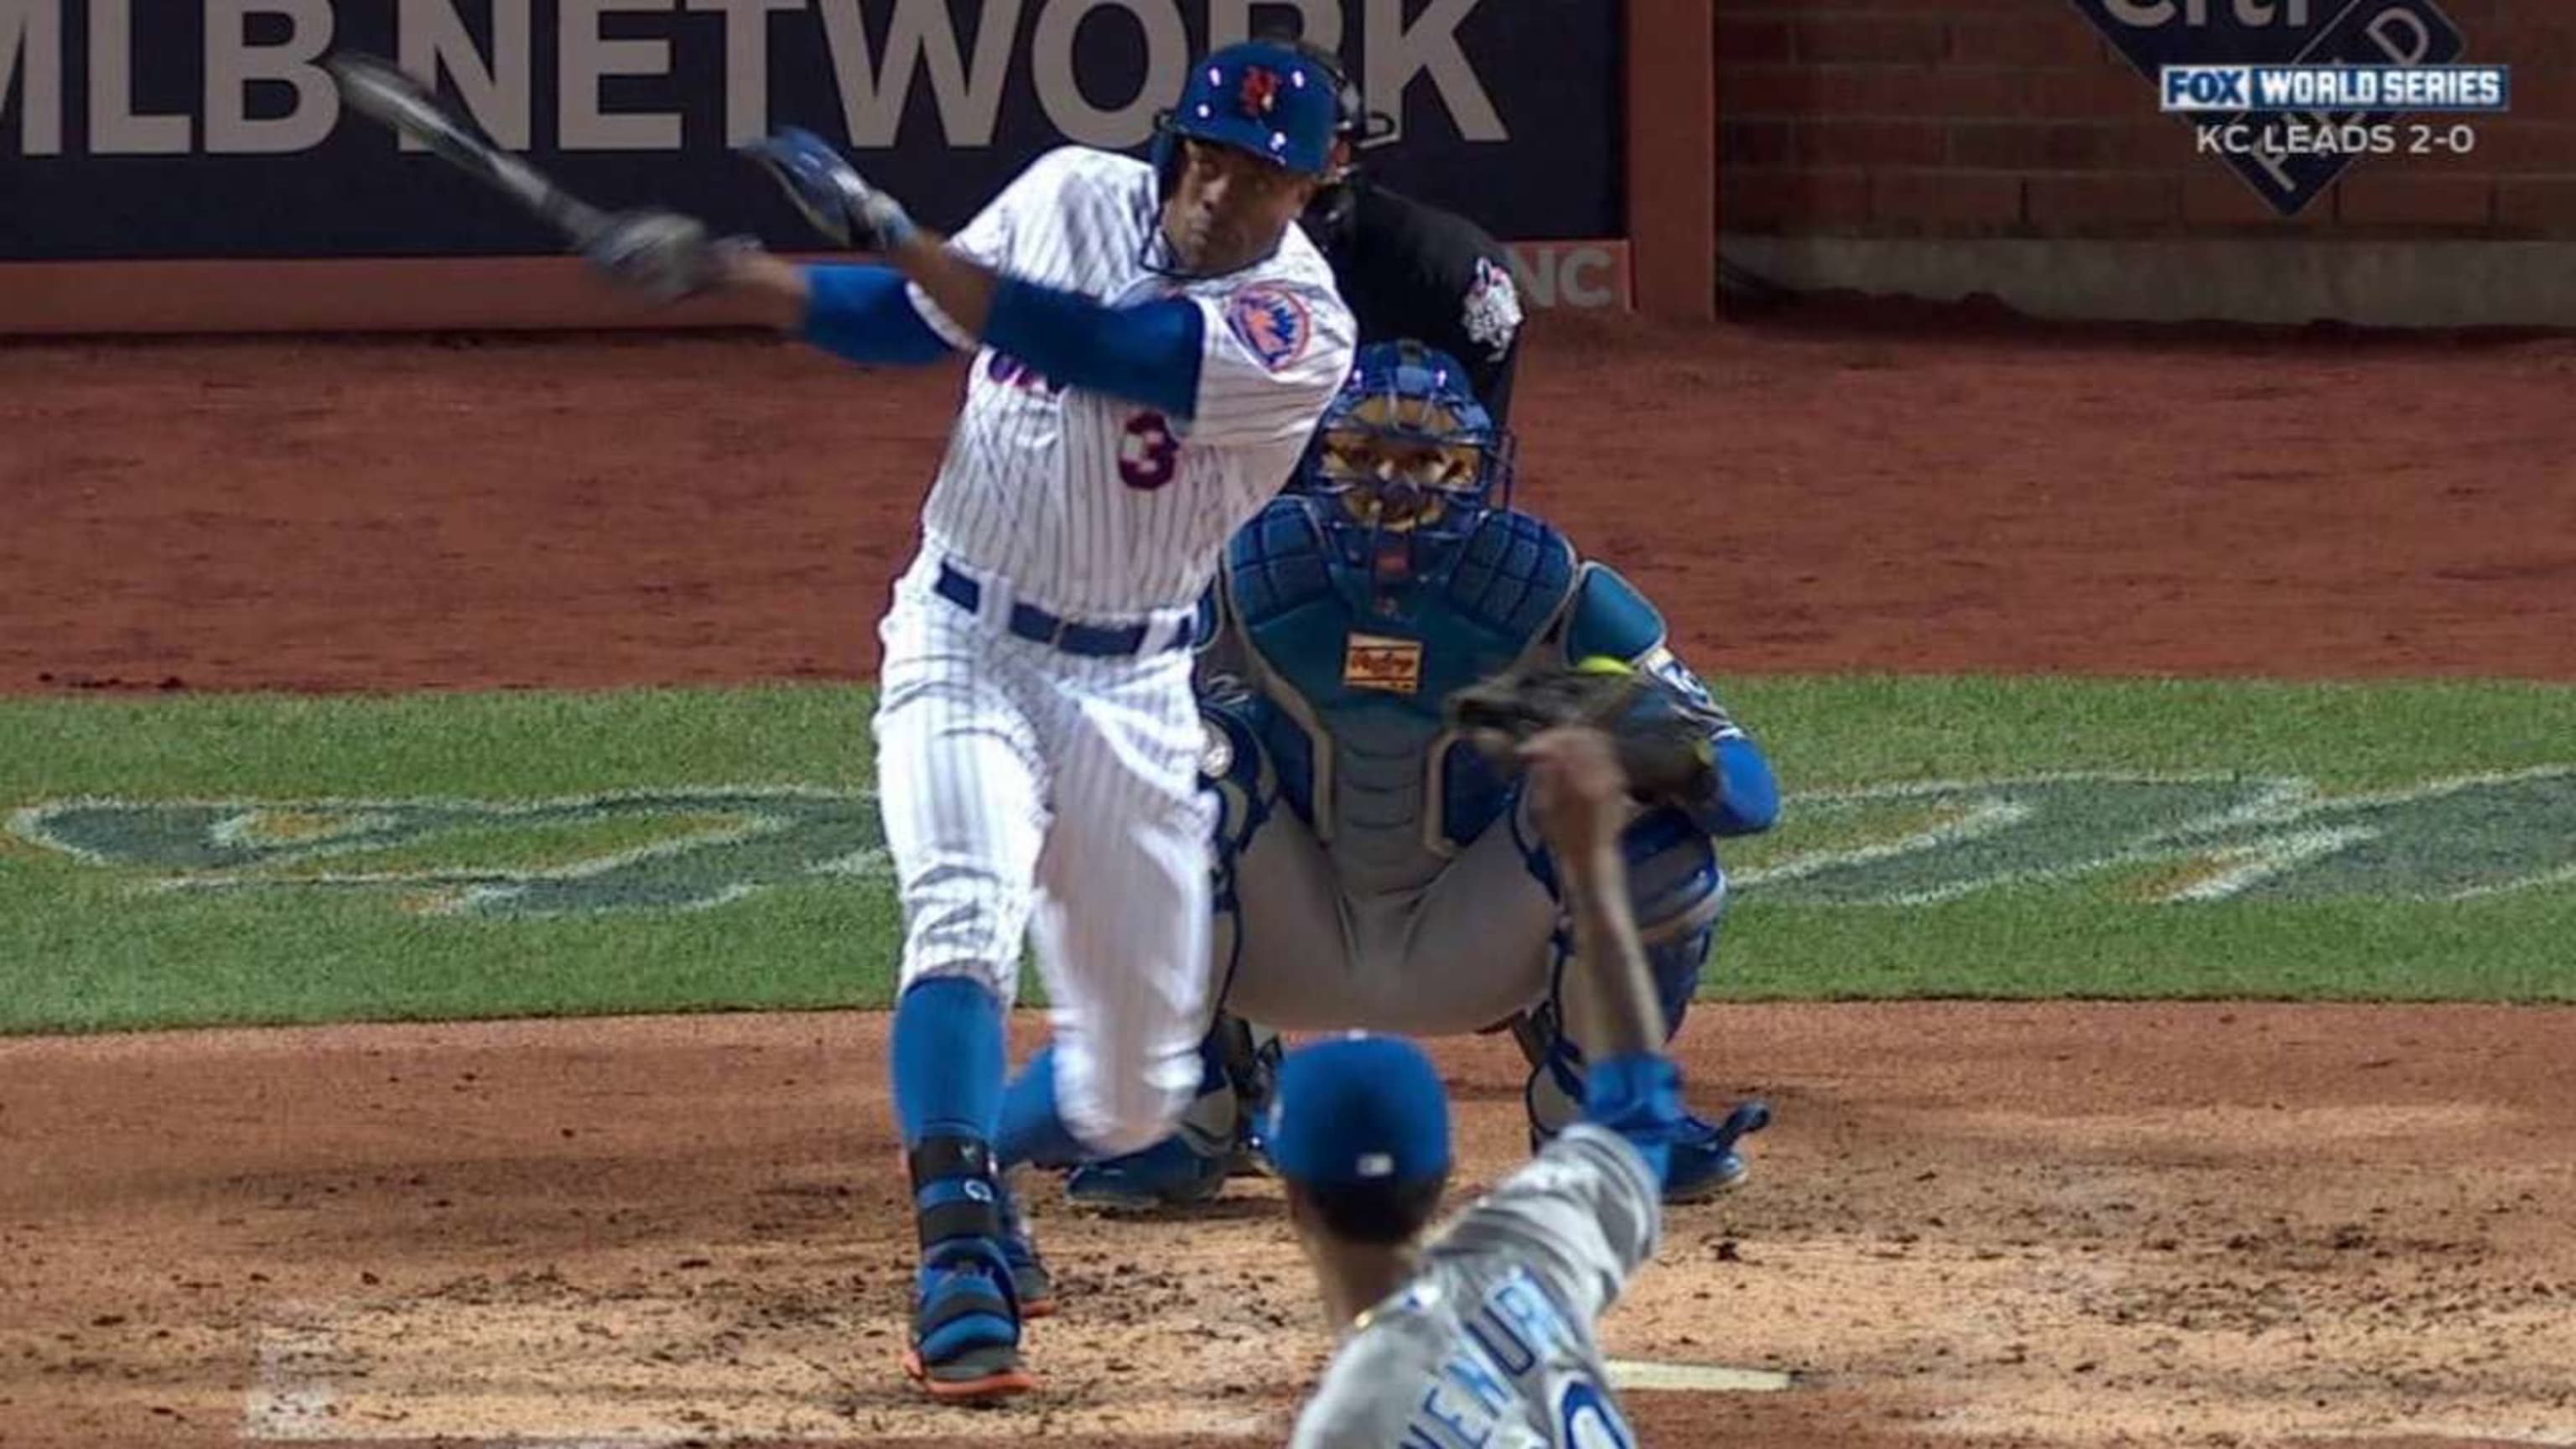 David Wright hit a 103-mph homer in his first home World Series